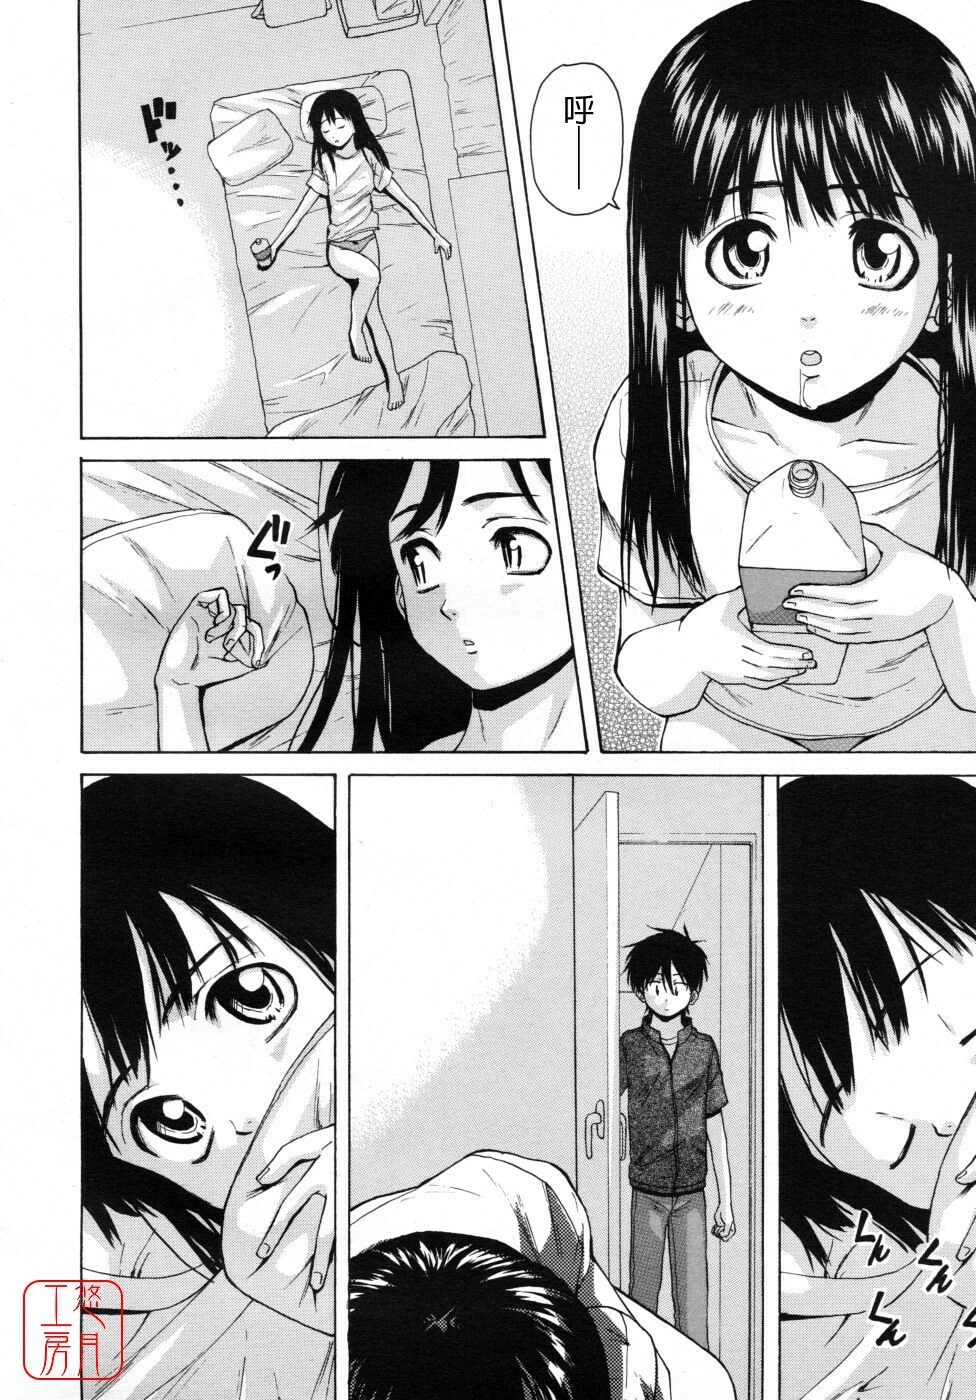 [Fuuga] Girl Friend 2 (Chinese) page 6 full